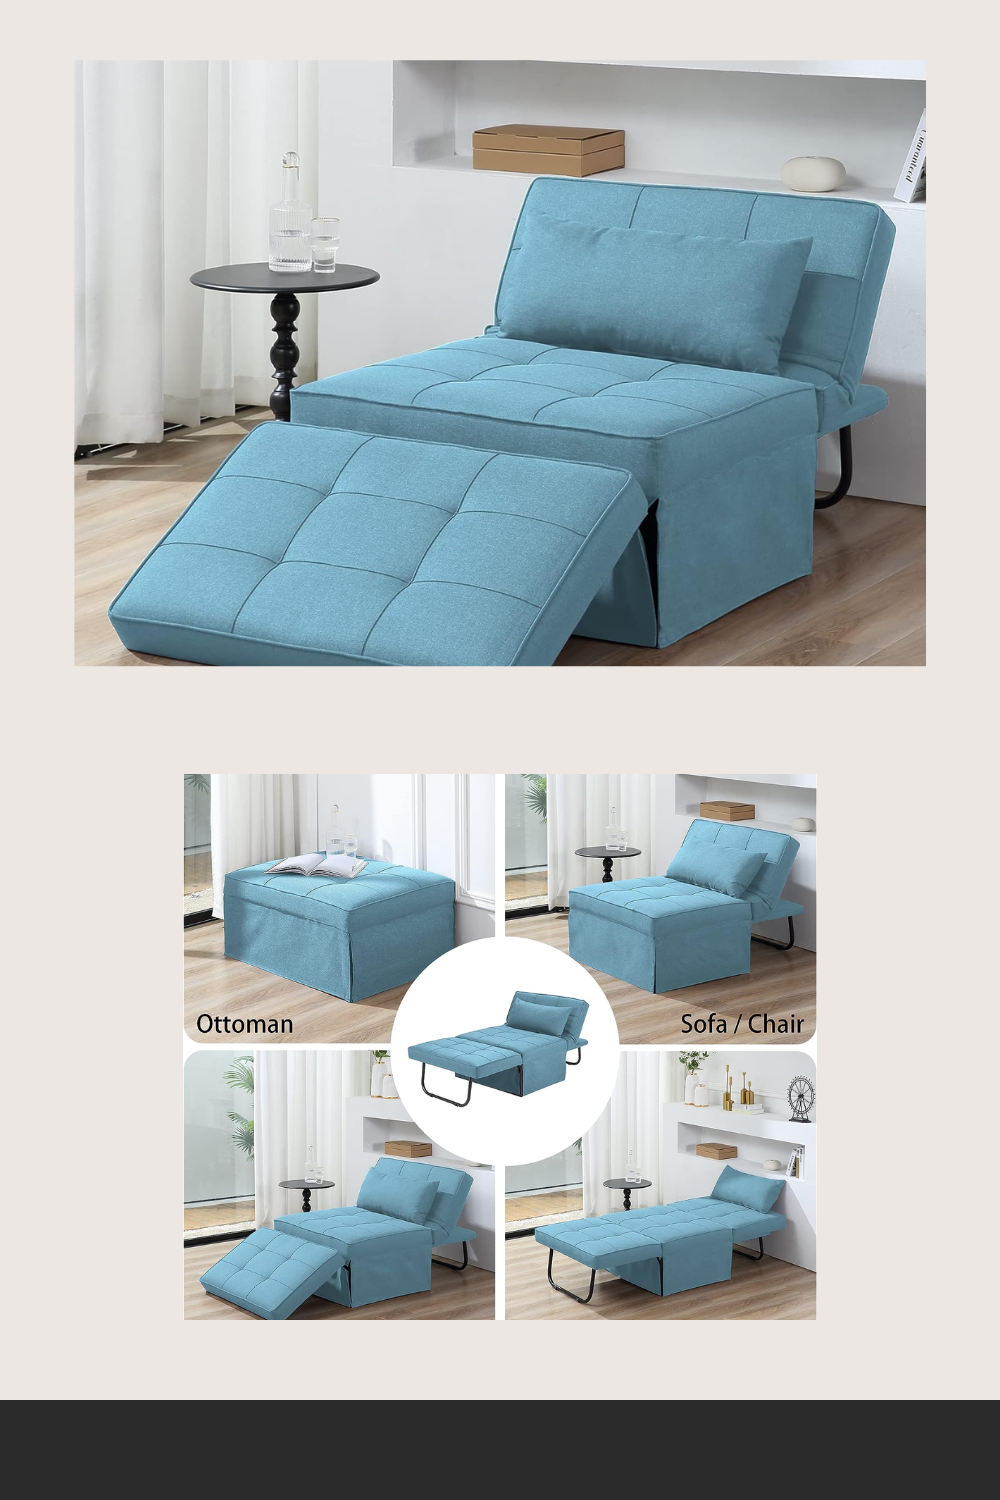 Upgrade Your Living Space with a
Convertible Sofa Chair Bed